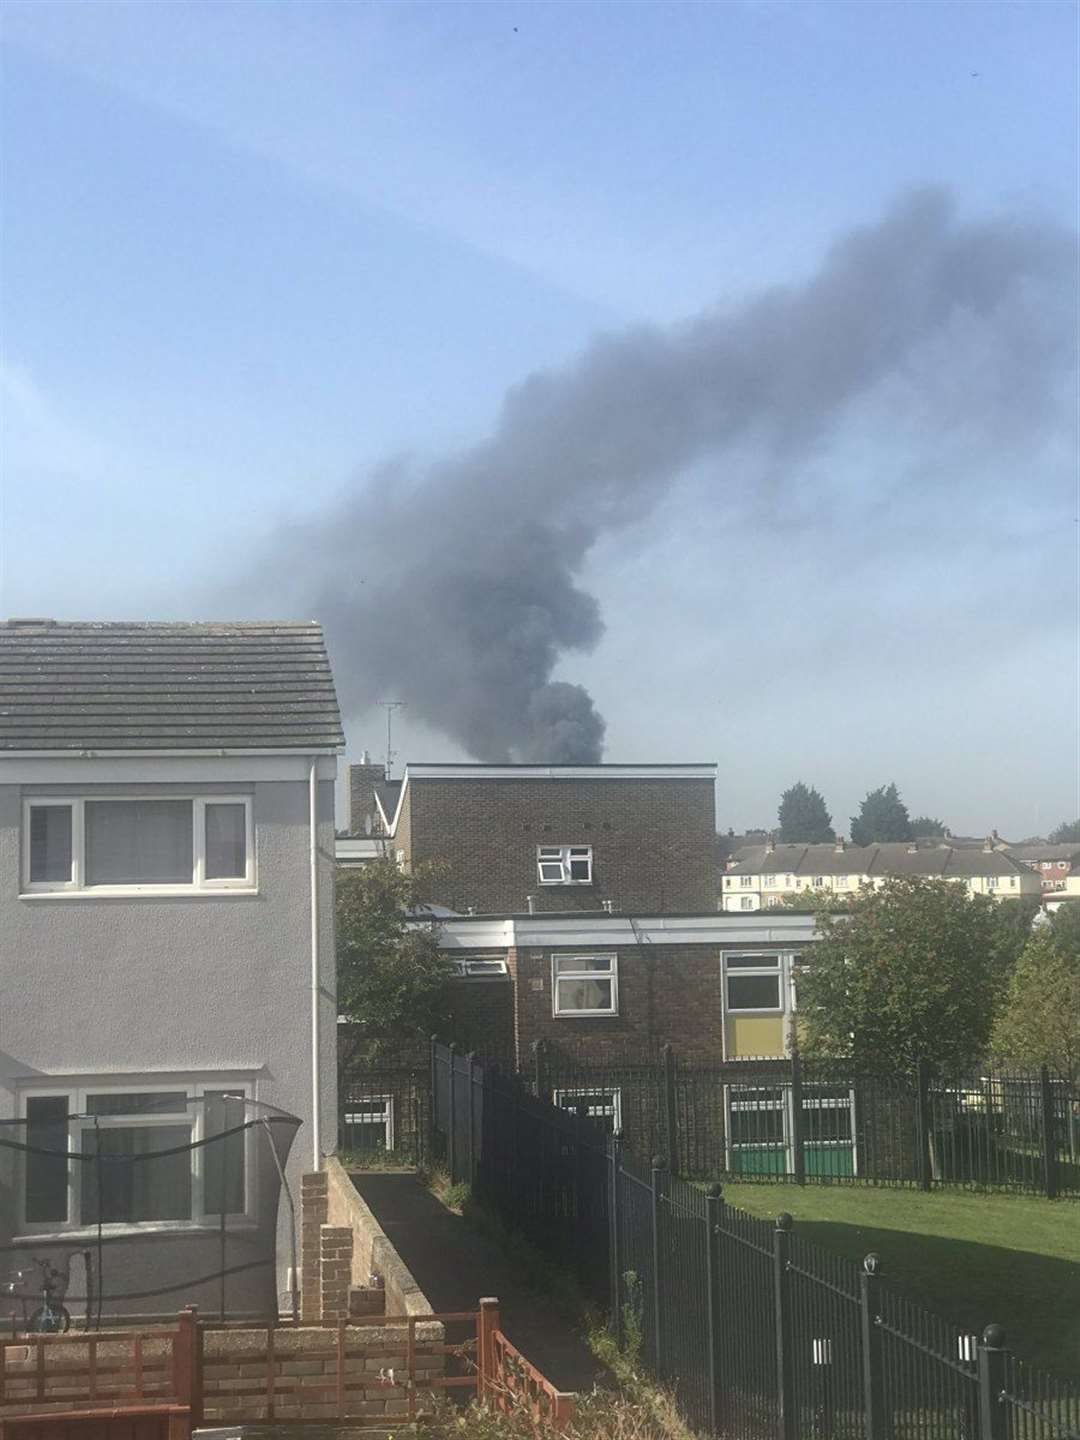 A plume of smoke rises over Chatham. Picture by @decksteria